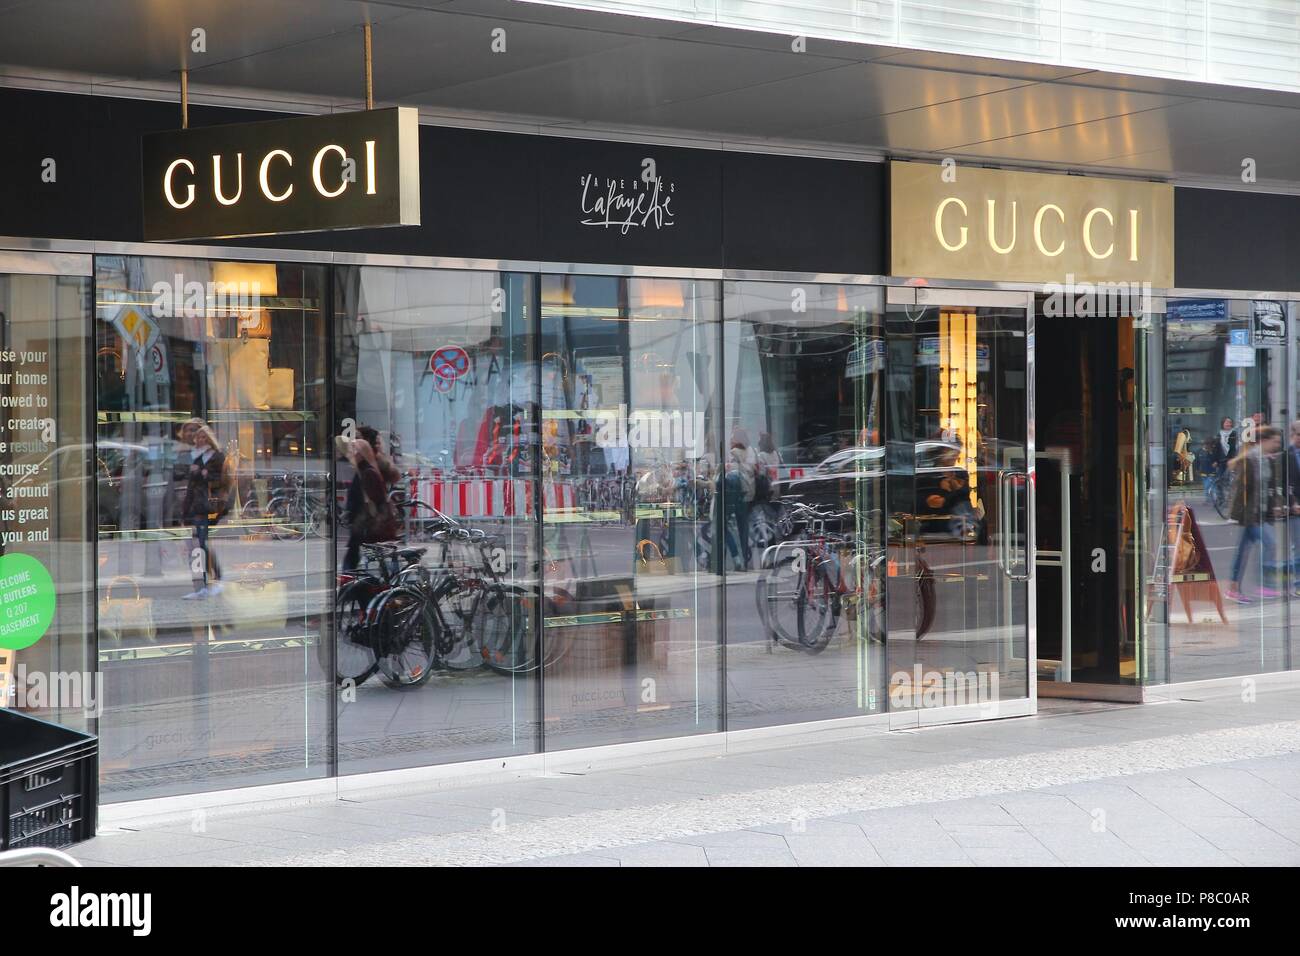 BERLIN, GERMANY - AUGUST 26, 2014: Gucci store windows in Berlin. Luxury brand Gucci exists since 1921 and was valued at 12.1 billion USD in 2013 Photo Alamy